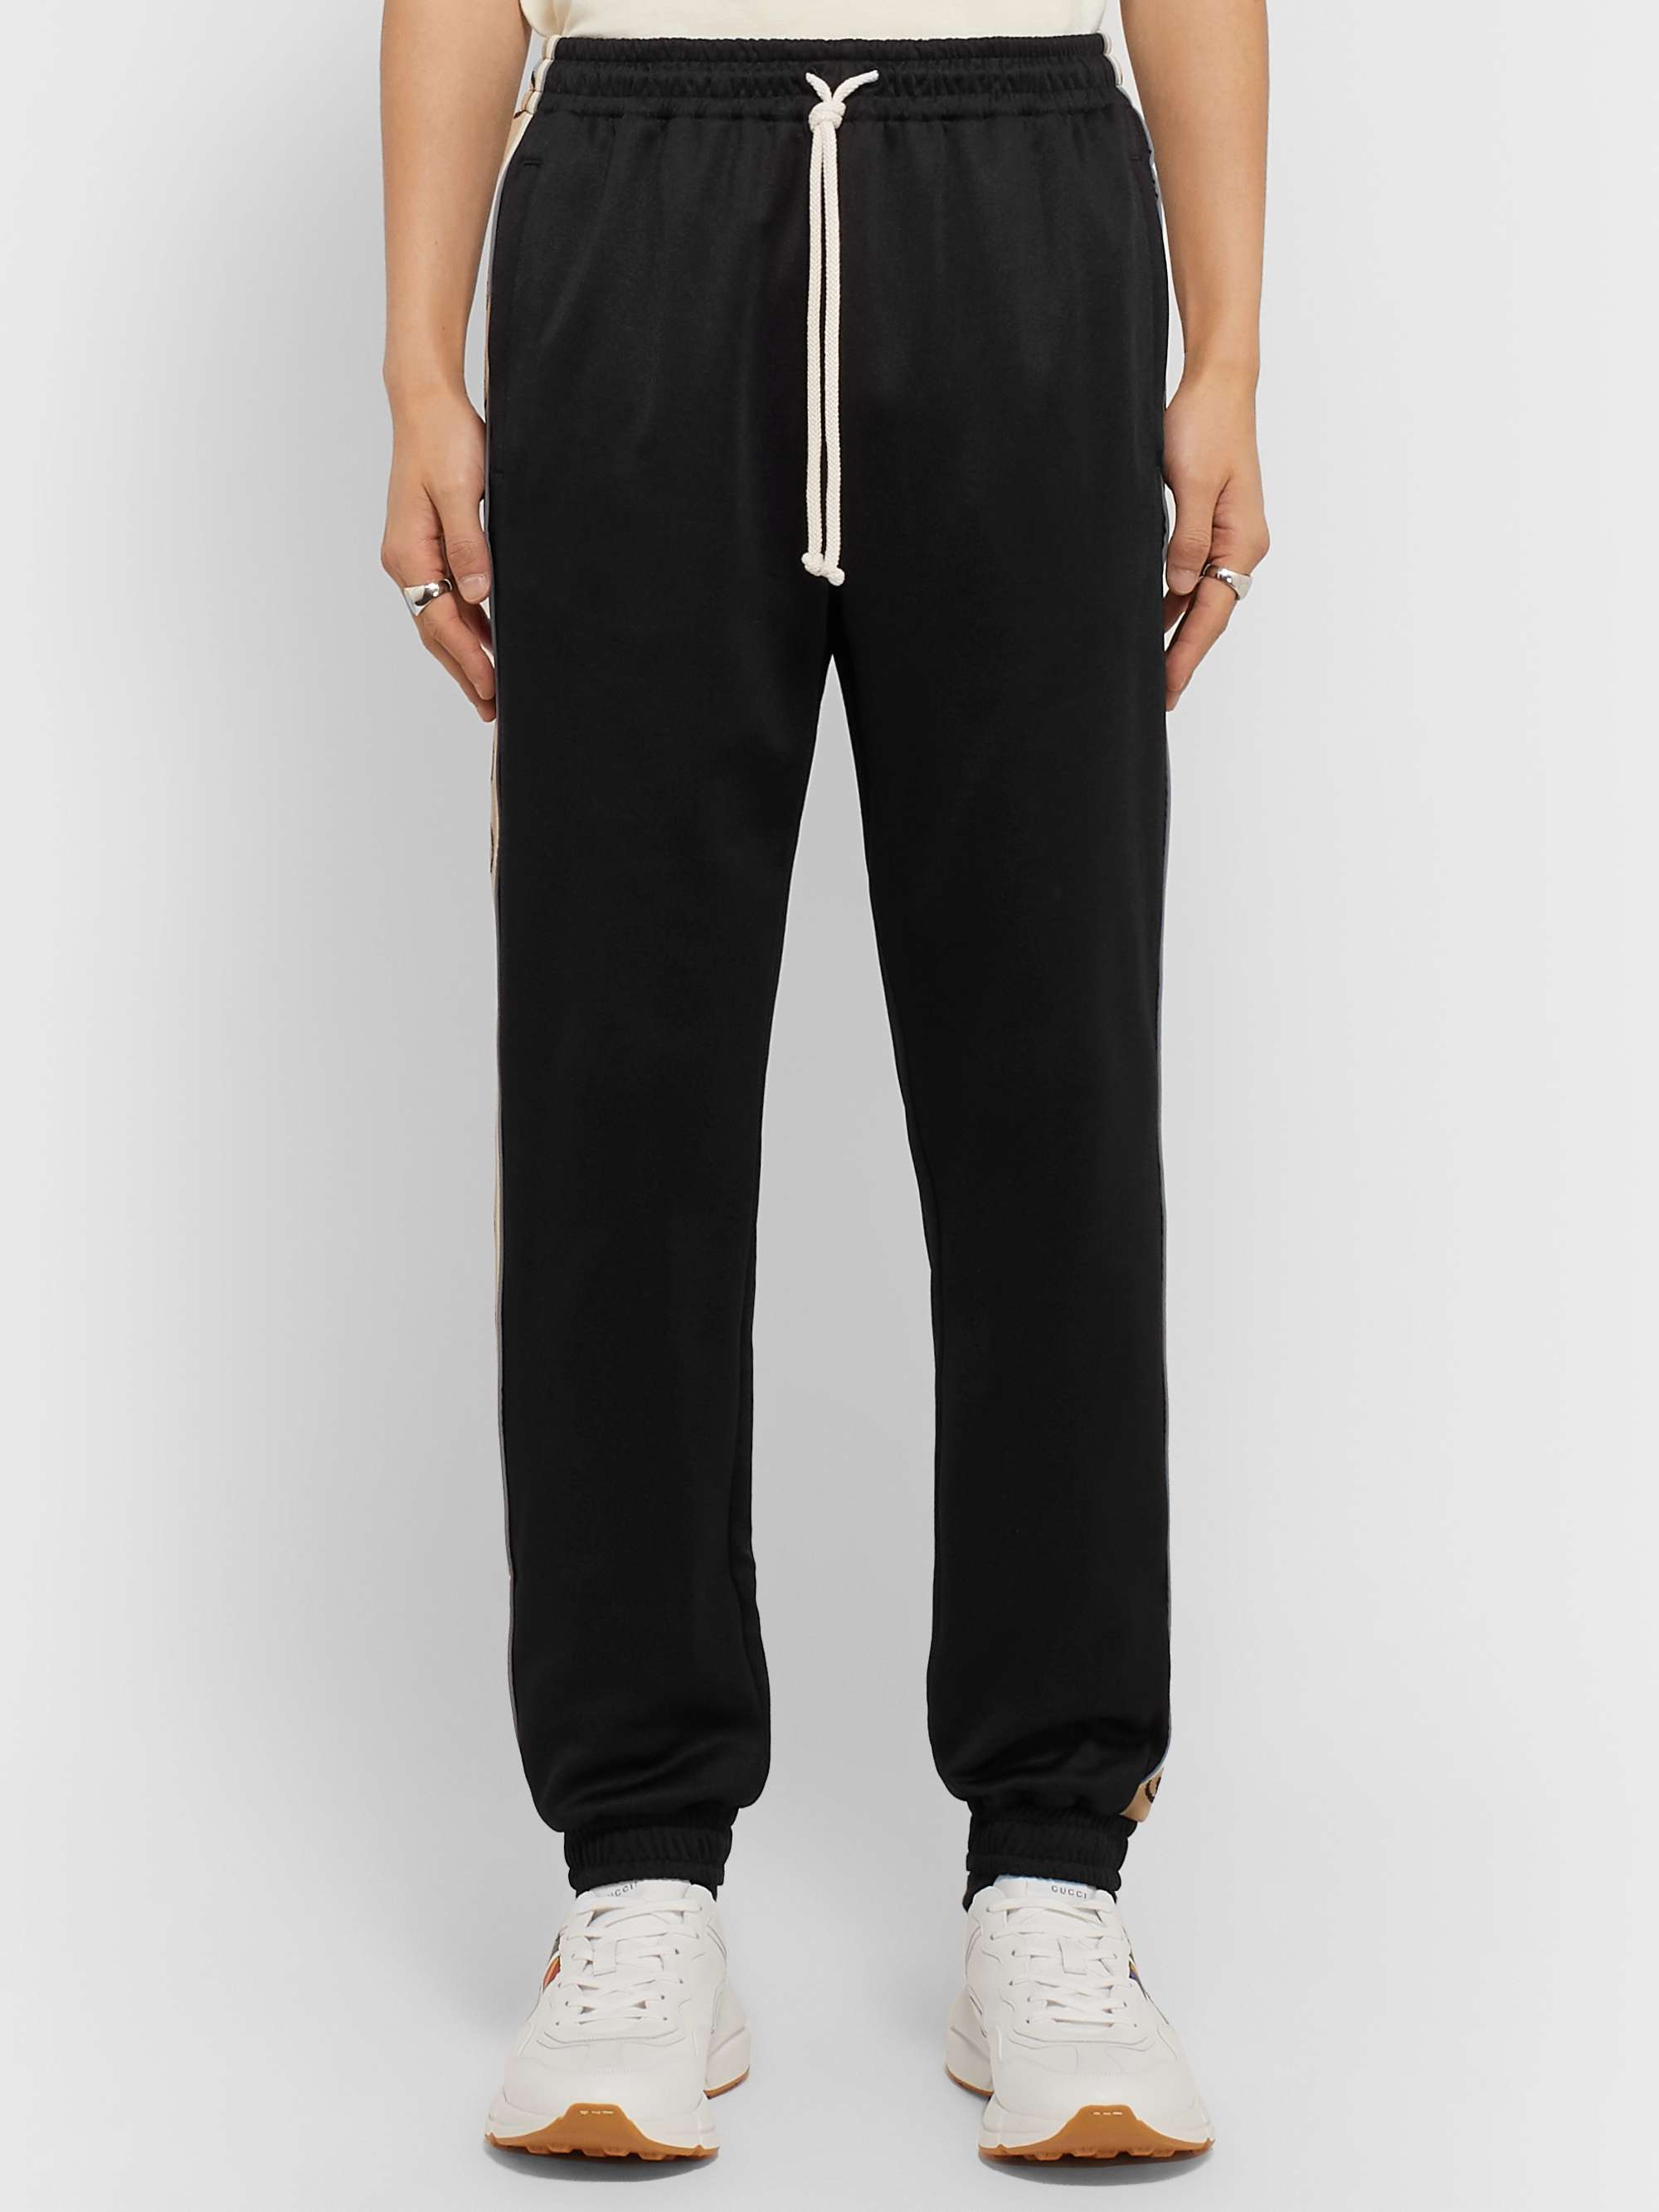 GUCCI Tapered Logo-Jacquard Webbing-Trimmed Tech-Jersey Track Pants